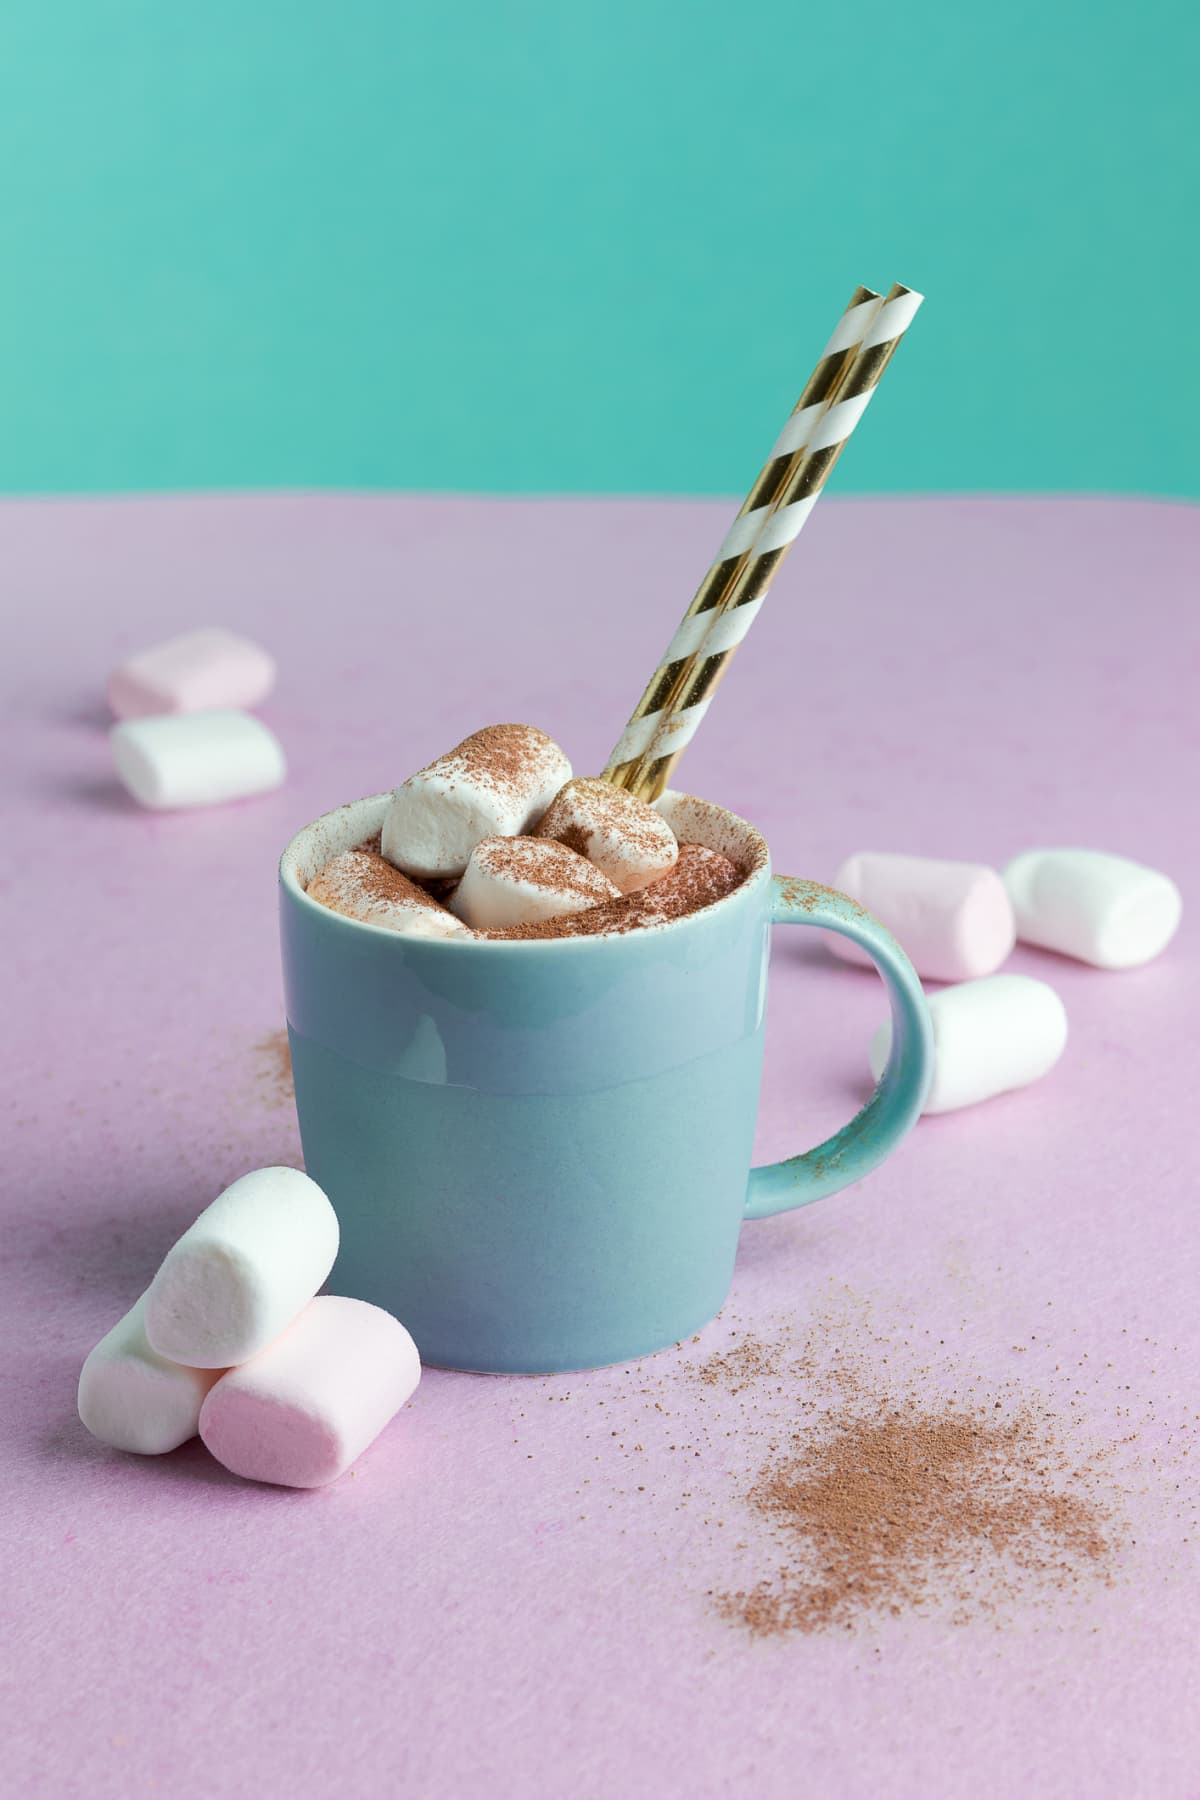 Vertical image of a cup of hot chocolate with stacked marshmallows and cacao, bright pastels pink turquoise copy space